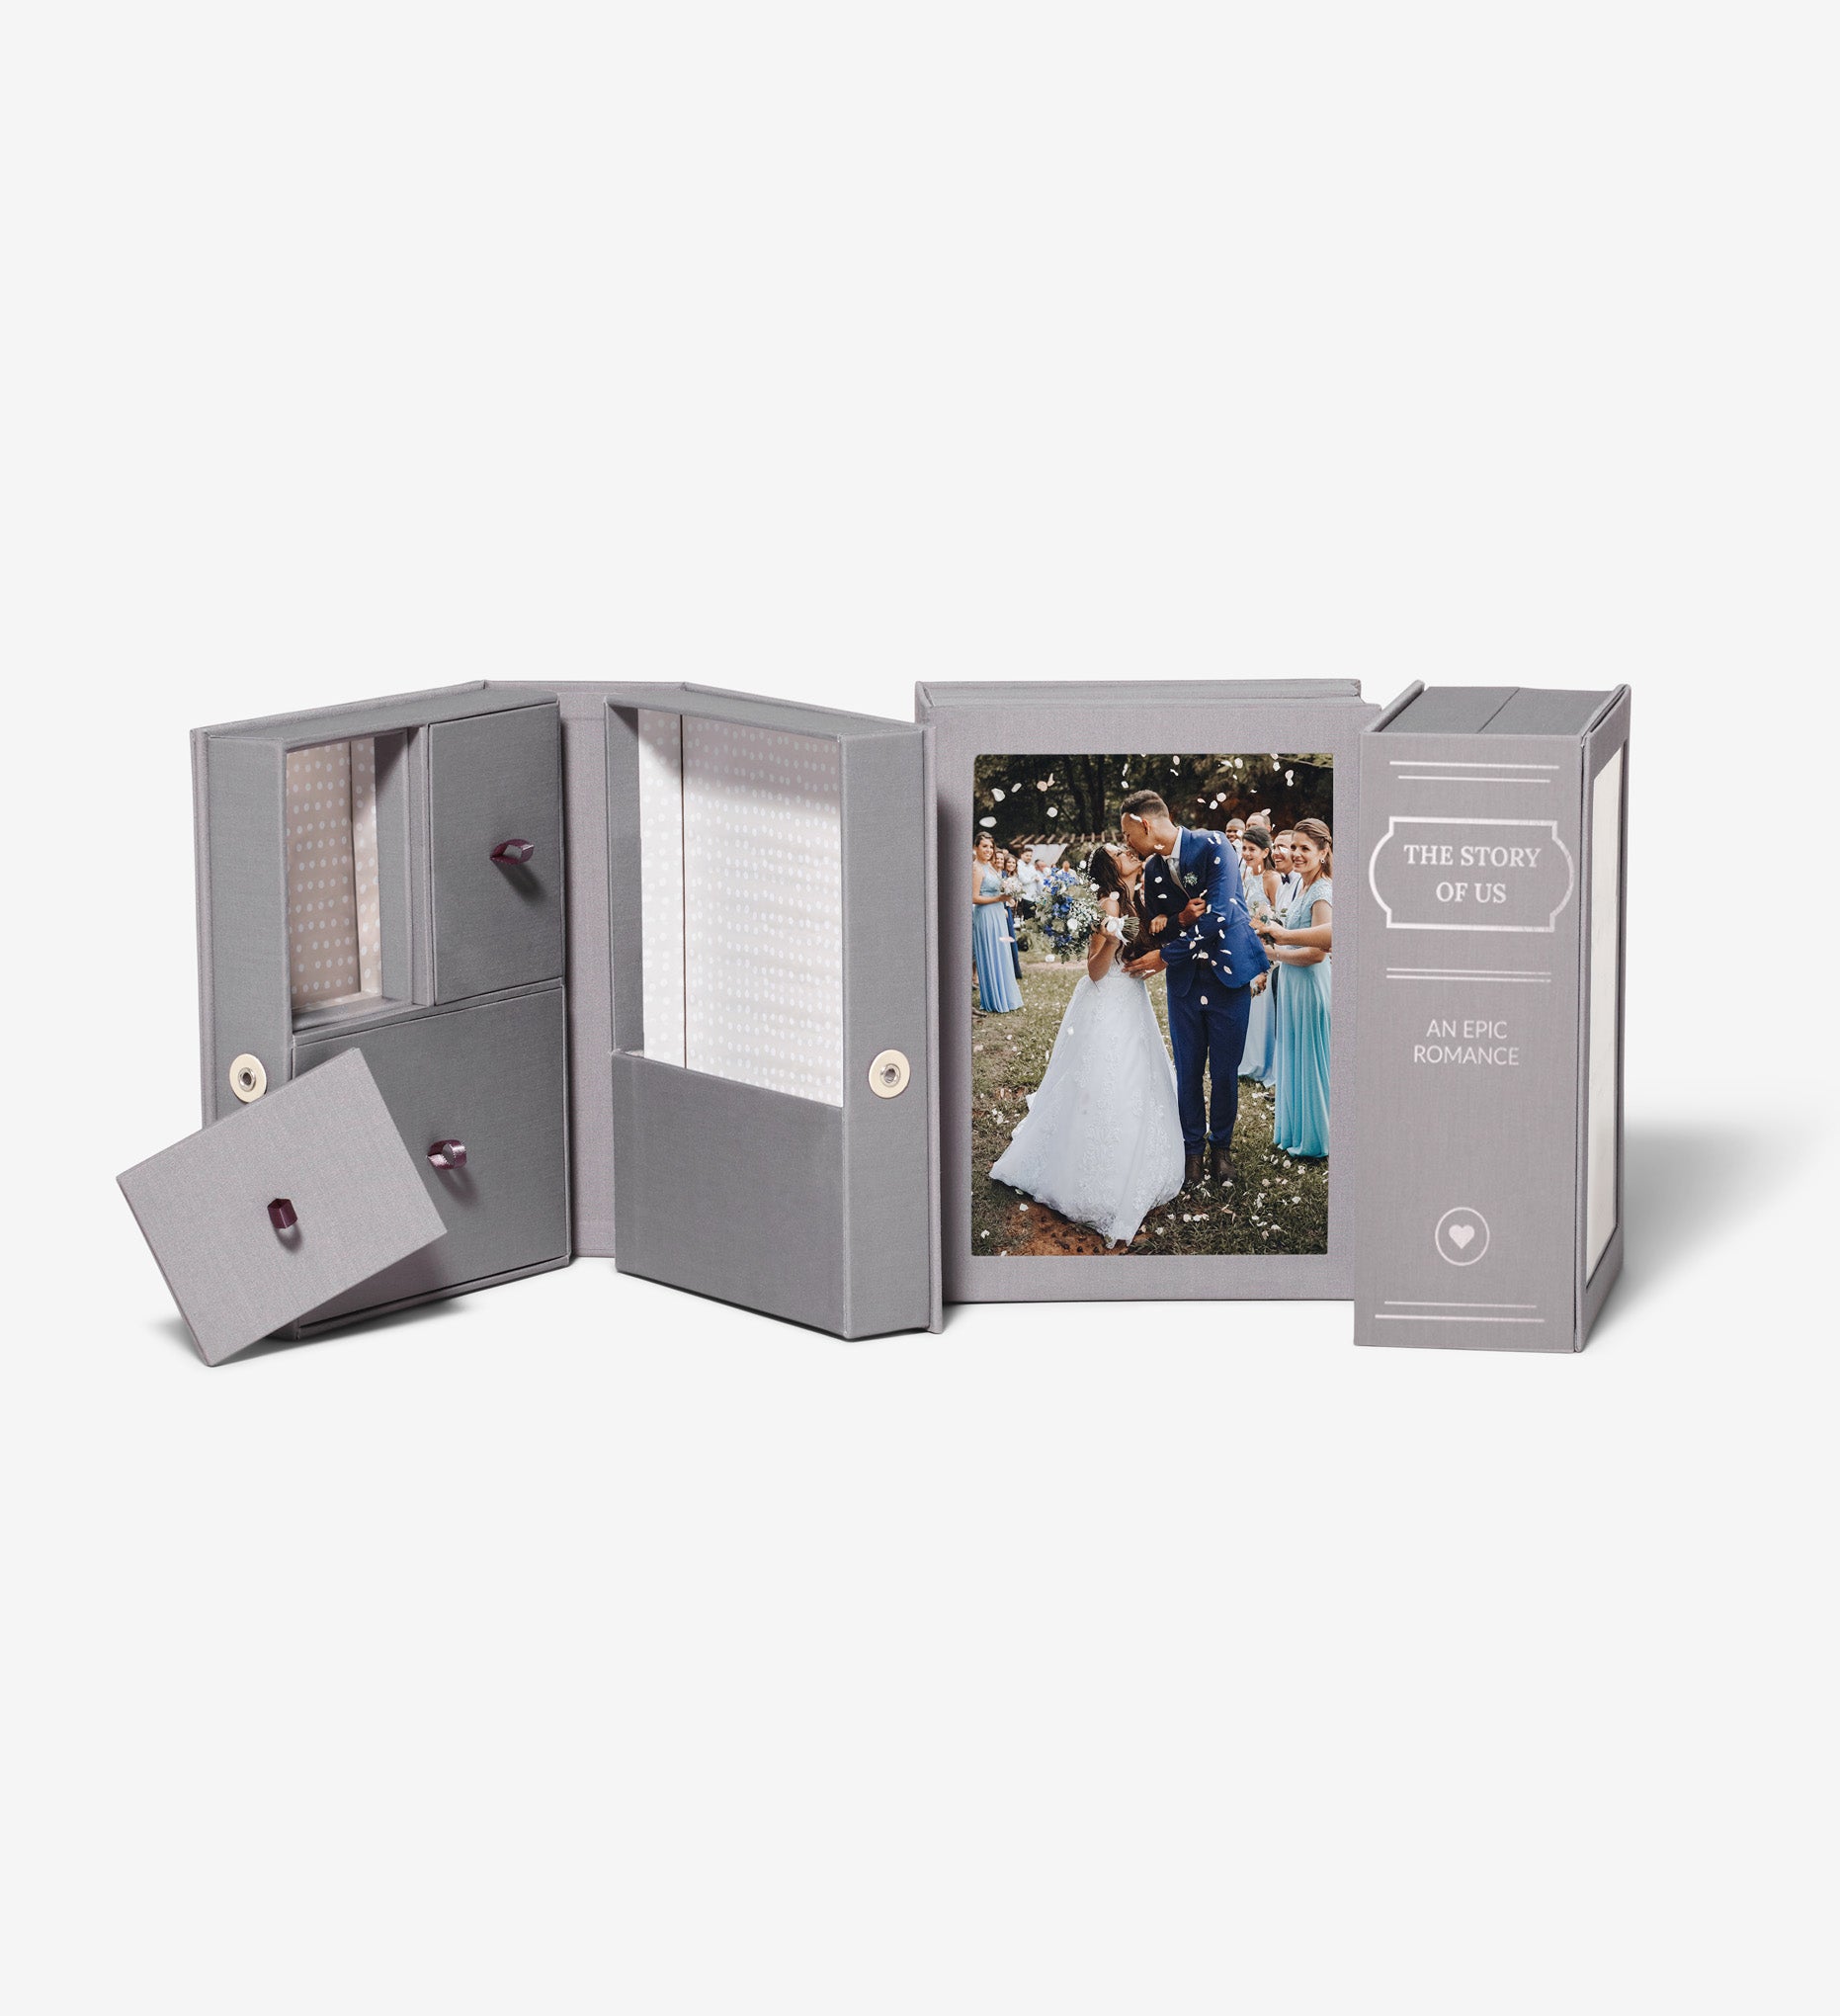 three slate story boxes, one is open, one is showing a photo of a couple at their wedding and one is showing a personalized spine